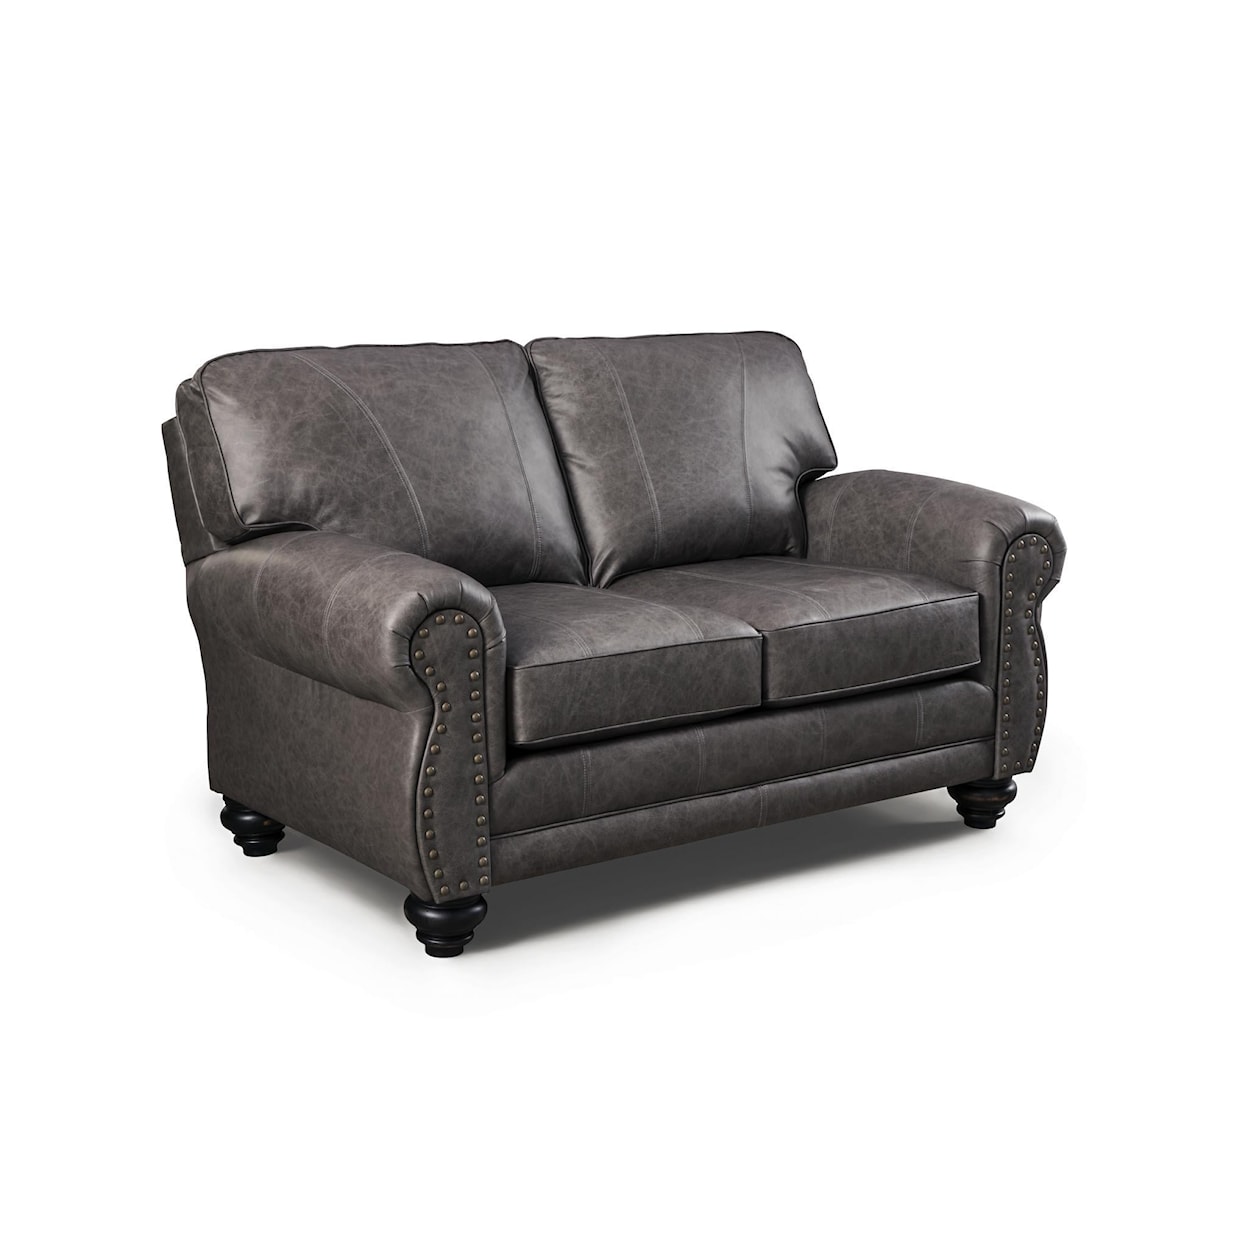 Best Home Furnishings Noble Leather Loveseat with Nailhead Trim